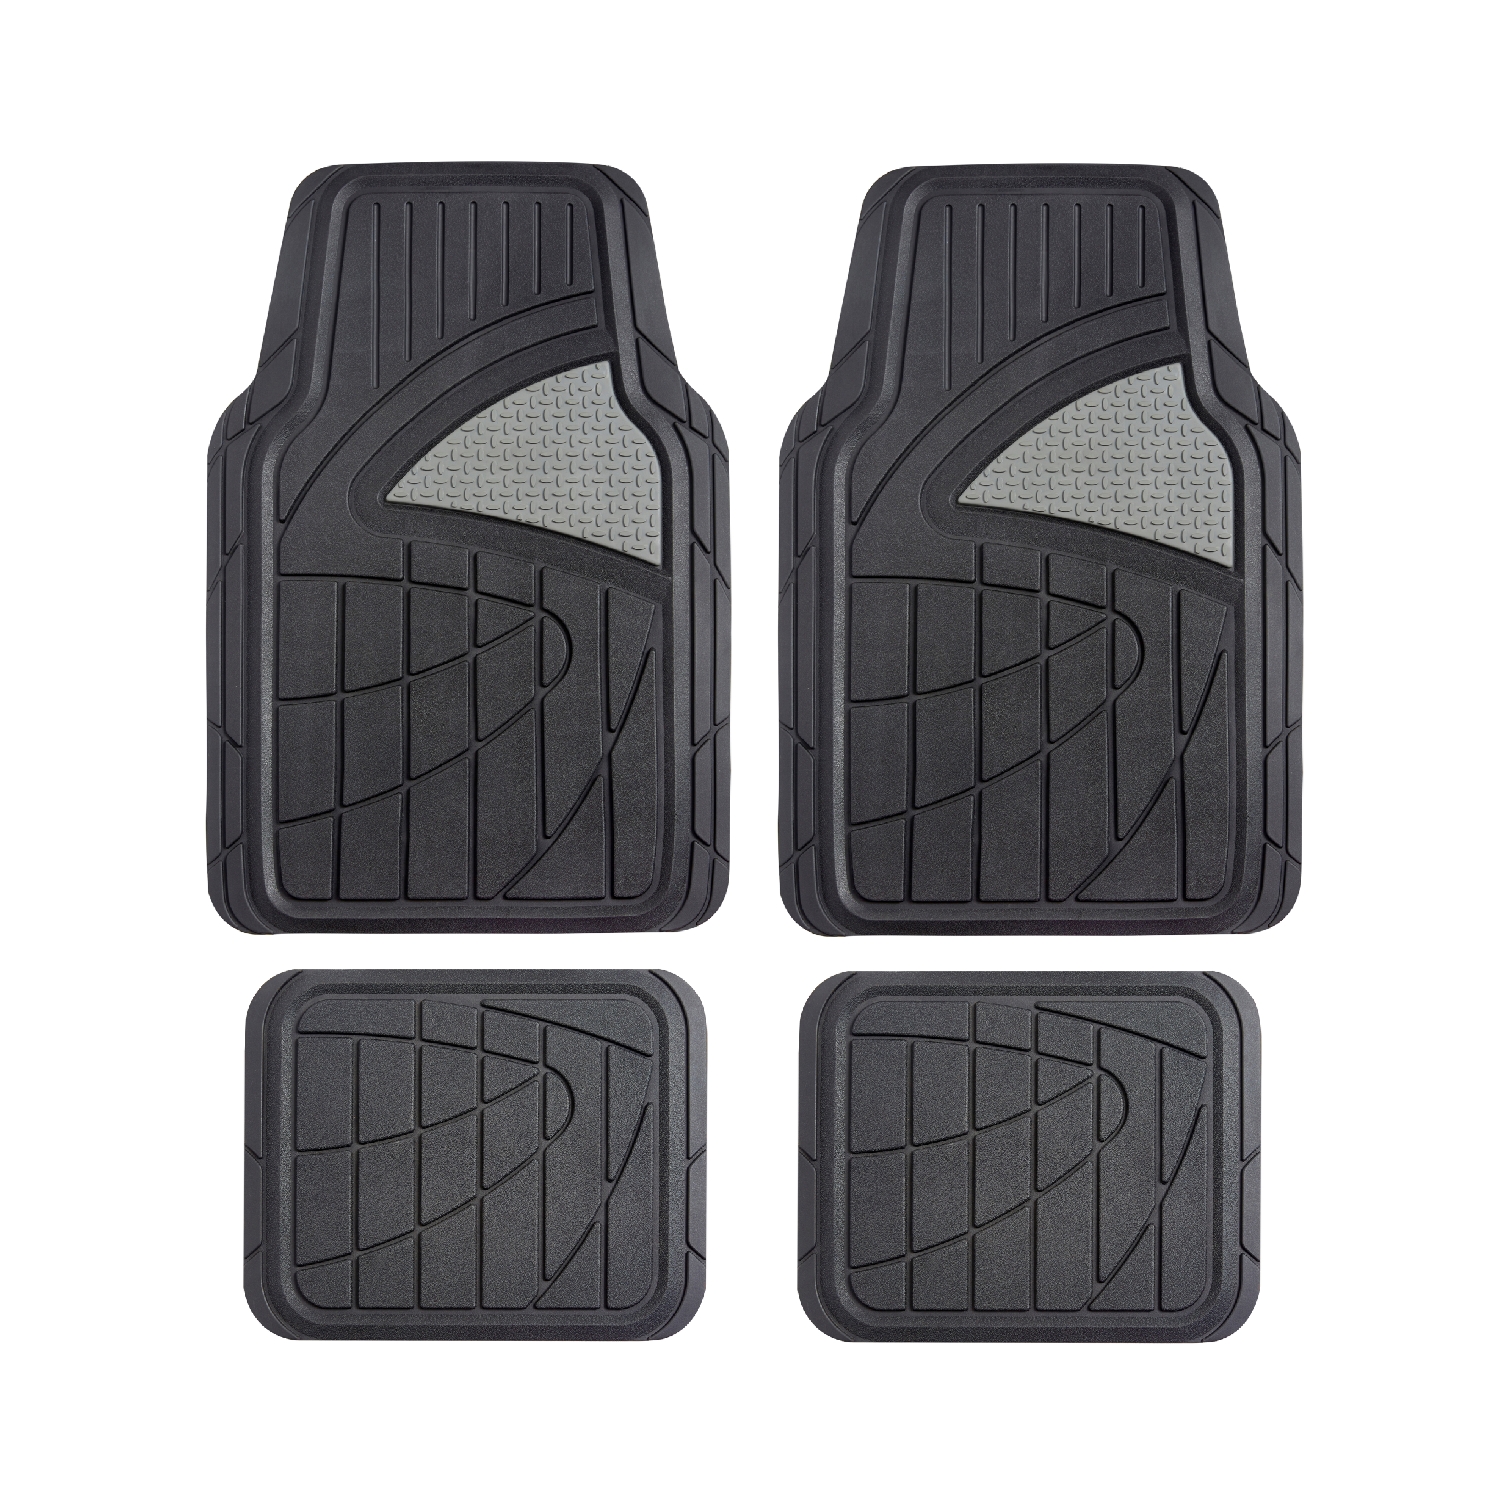 Deluxe universal 4pc car flooring mat Two-tone Featured Image